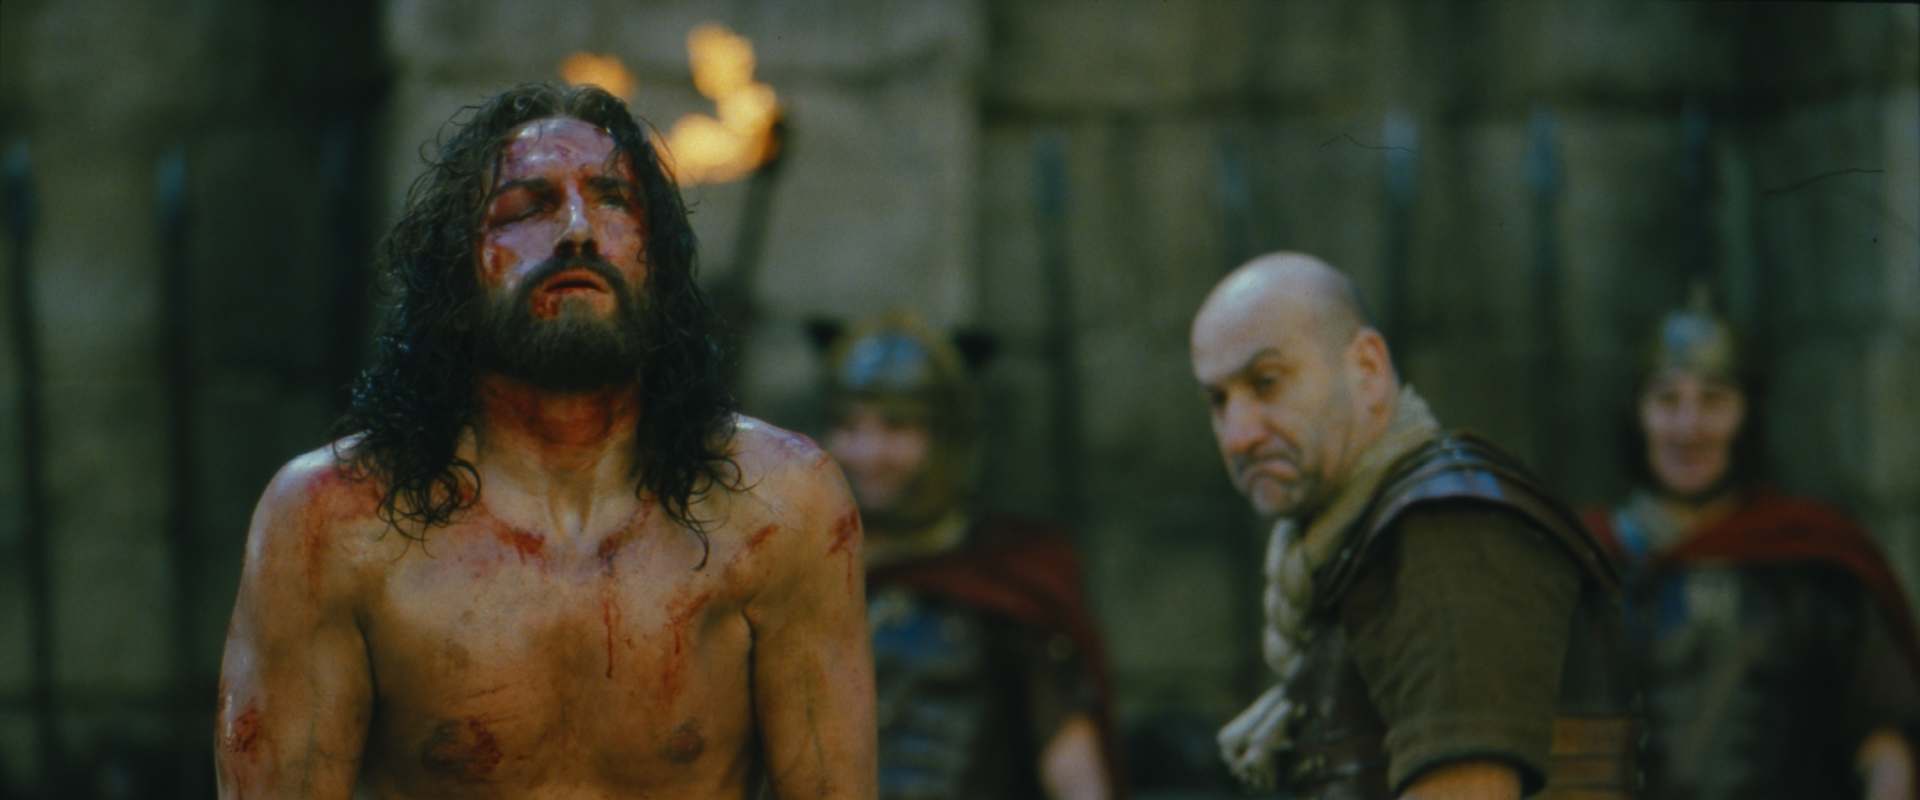 the passion of christ full movie youtube